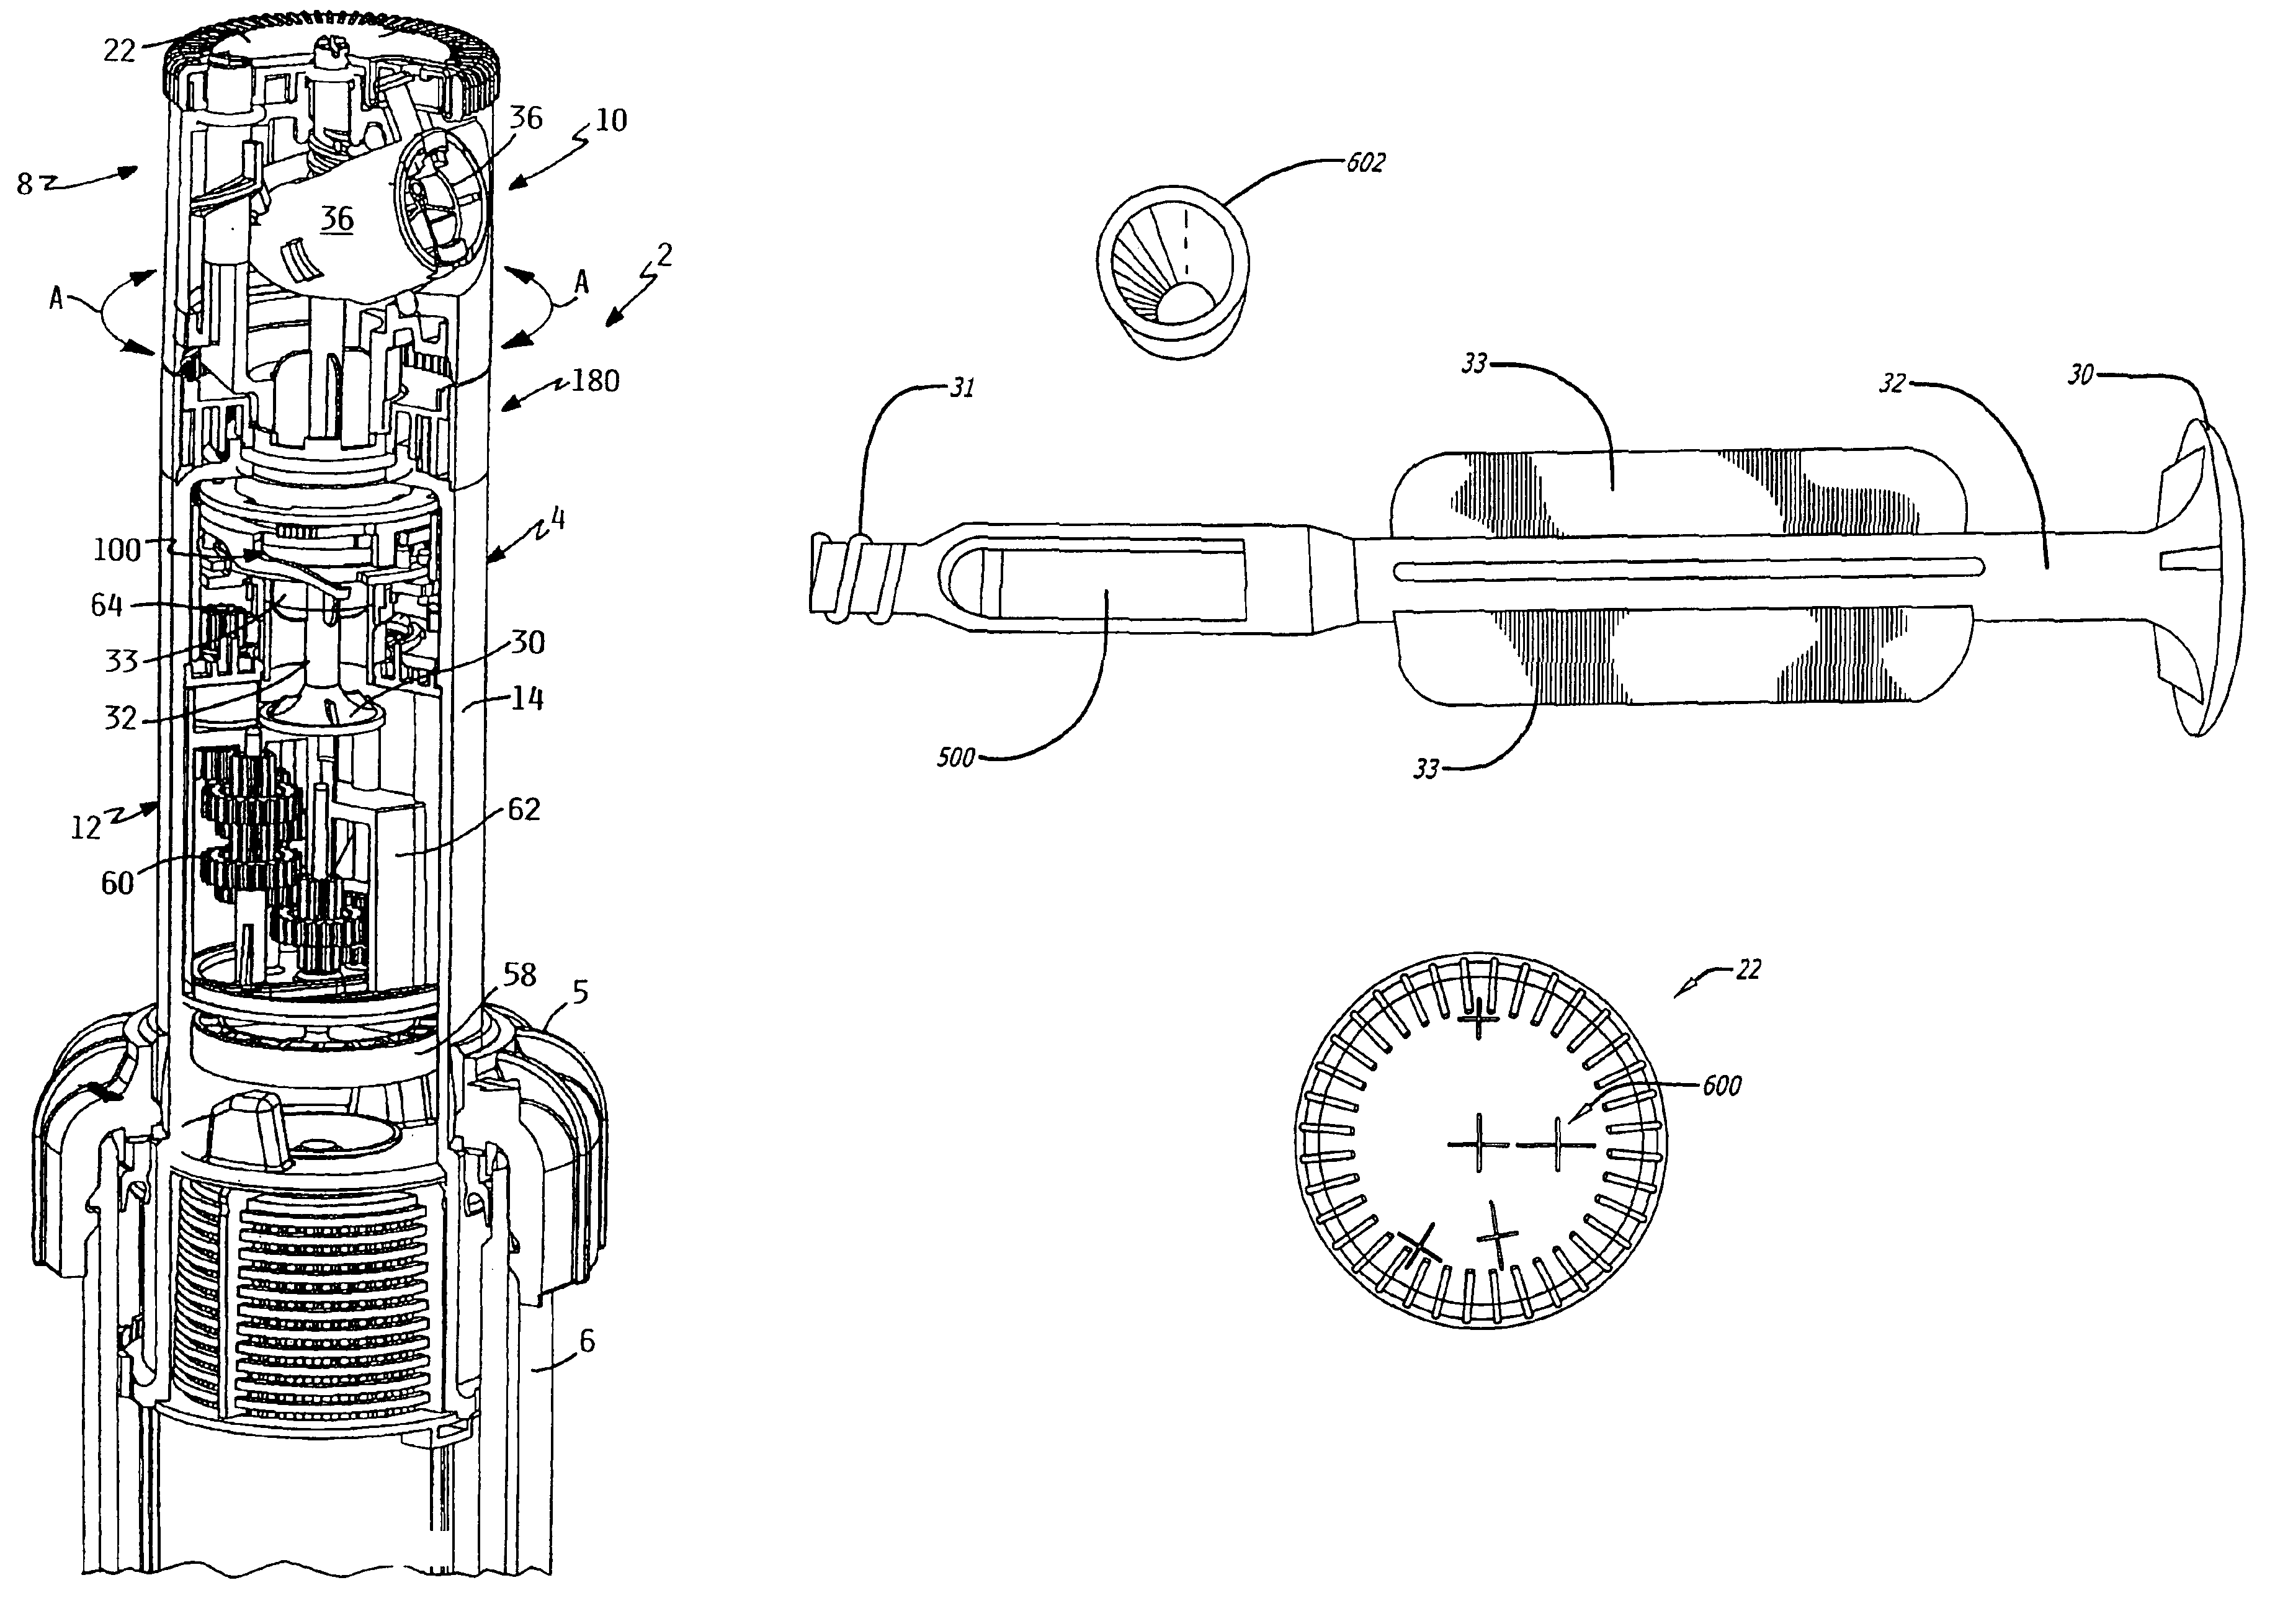 Rotary sprinkler with arc adjustment guide and flow-through shaft